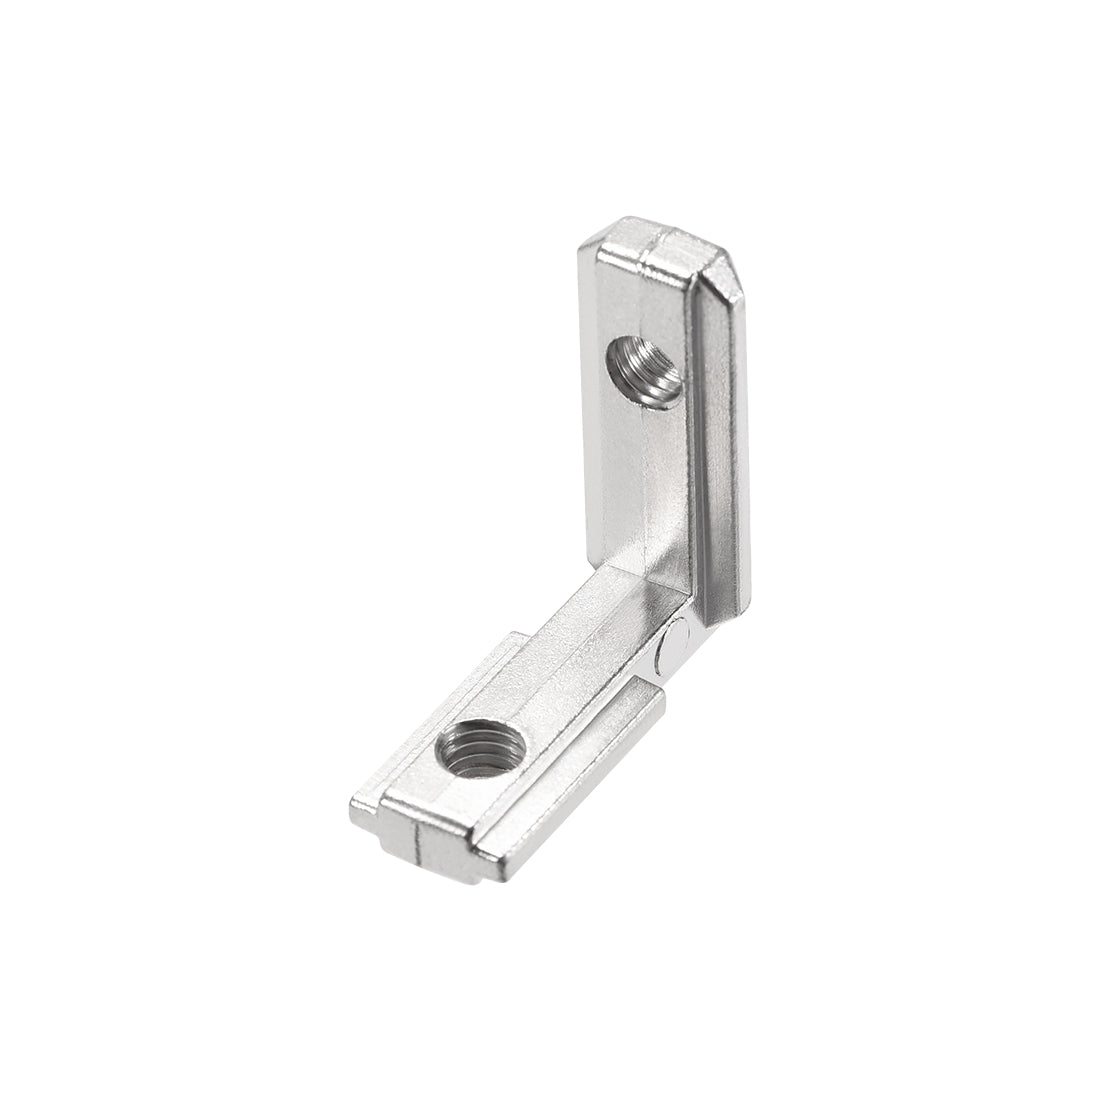 Uxcell Uxcell Interior Joint Bracket, Inside Corner Connector 2020 Series Slot 6mm with Screws for Aluminum Extrusion Profile, 20 Pcs